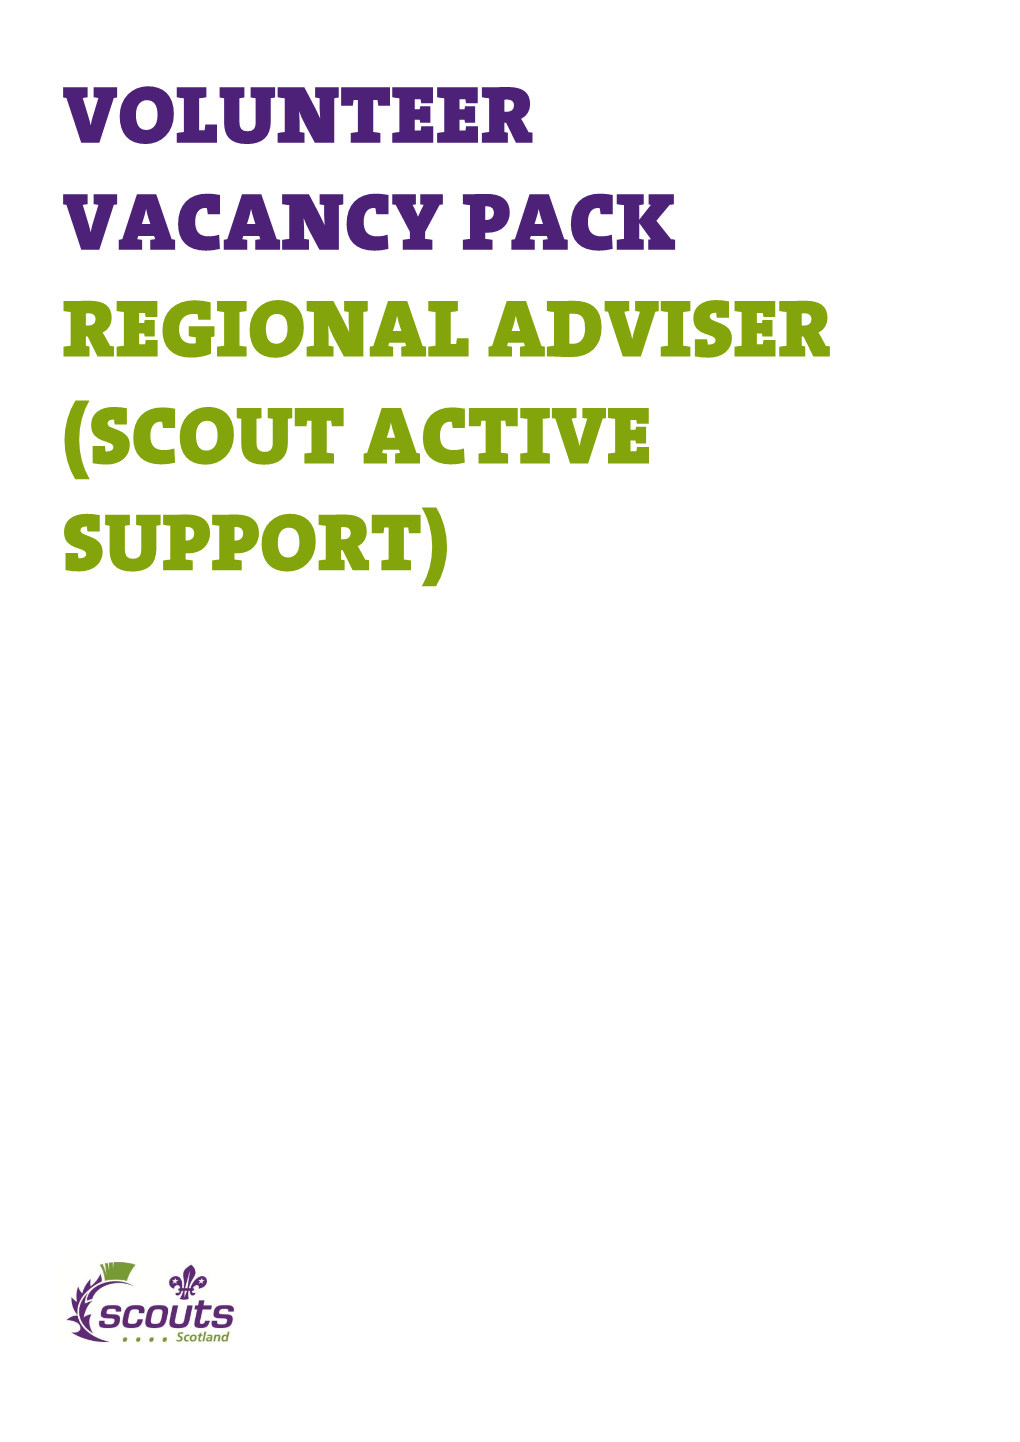 Scout Active Support)